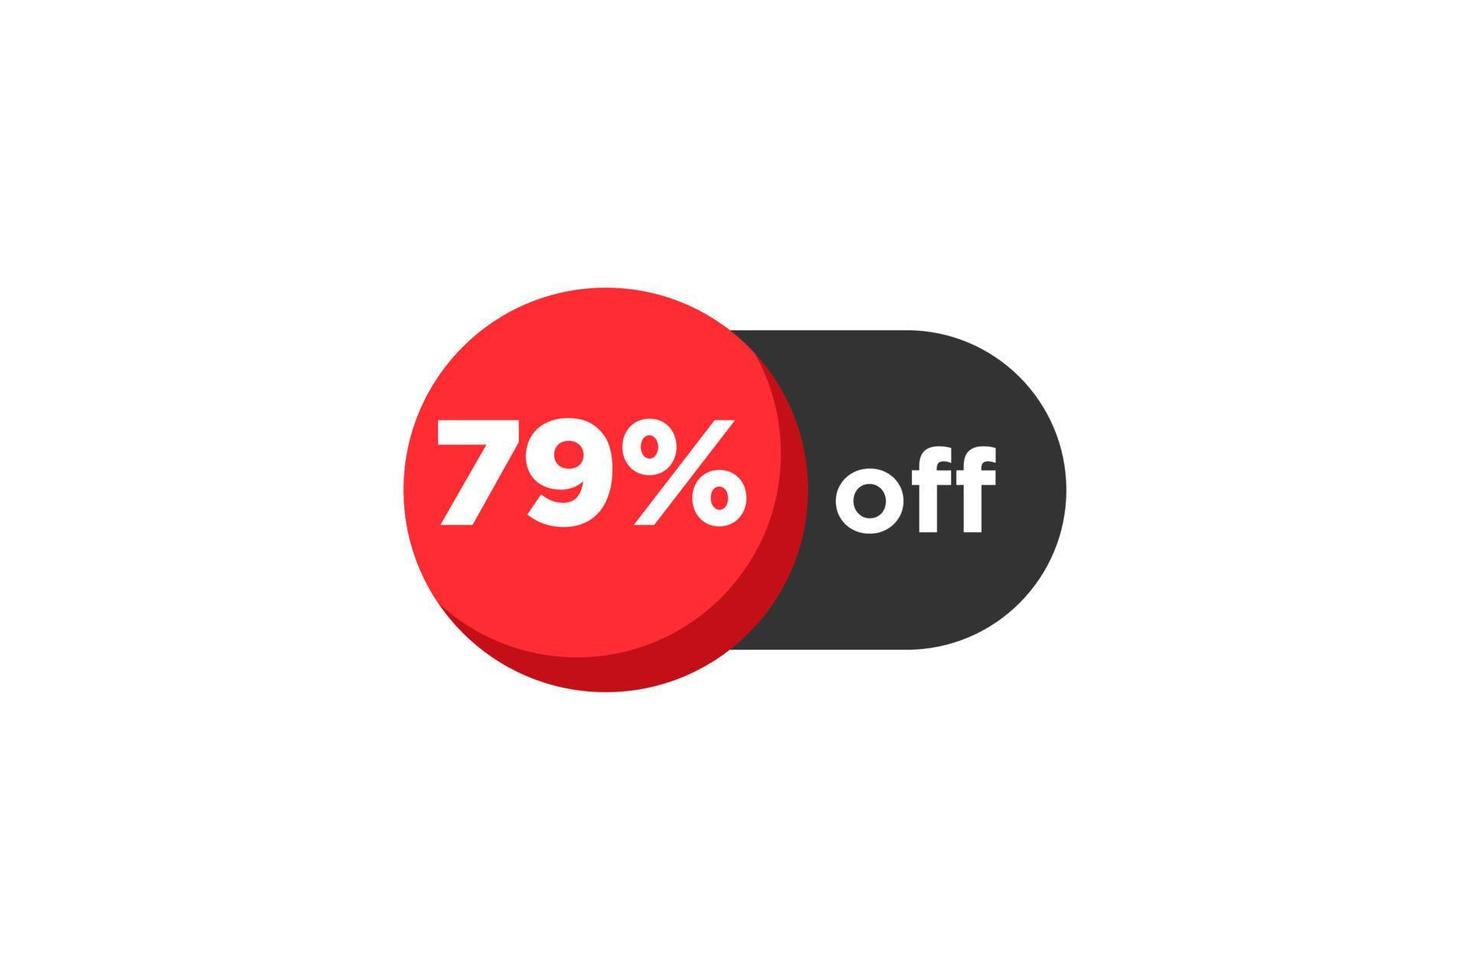 79 discount, Sales Vector badges for Labels, , Stickers, Banners, Tags, Web Stickers, New offer. Discount origami sign banner.